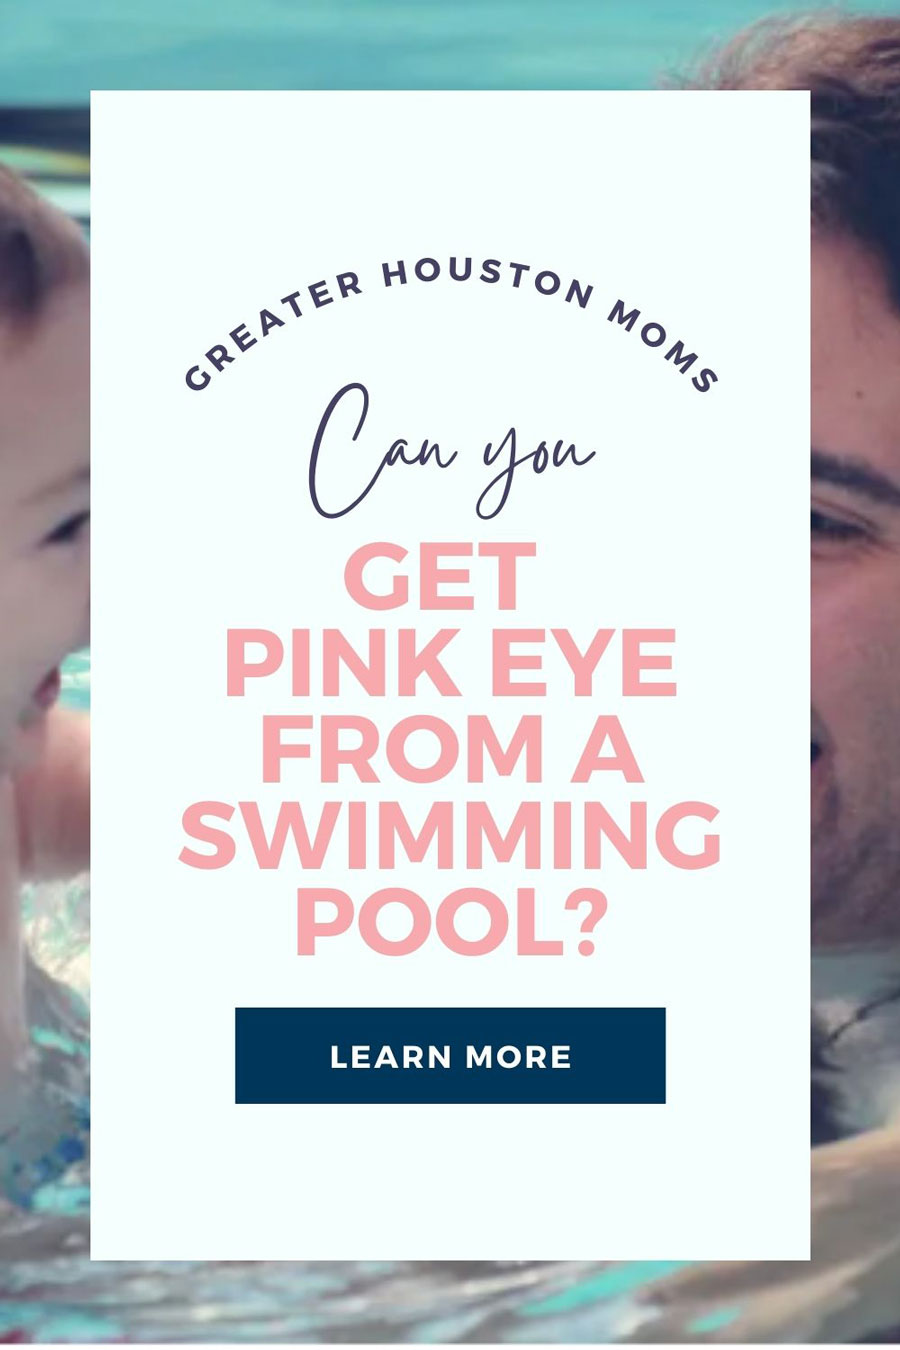 Can you get pink eye from a swimming pool?